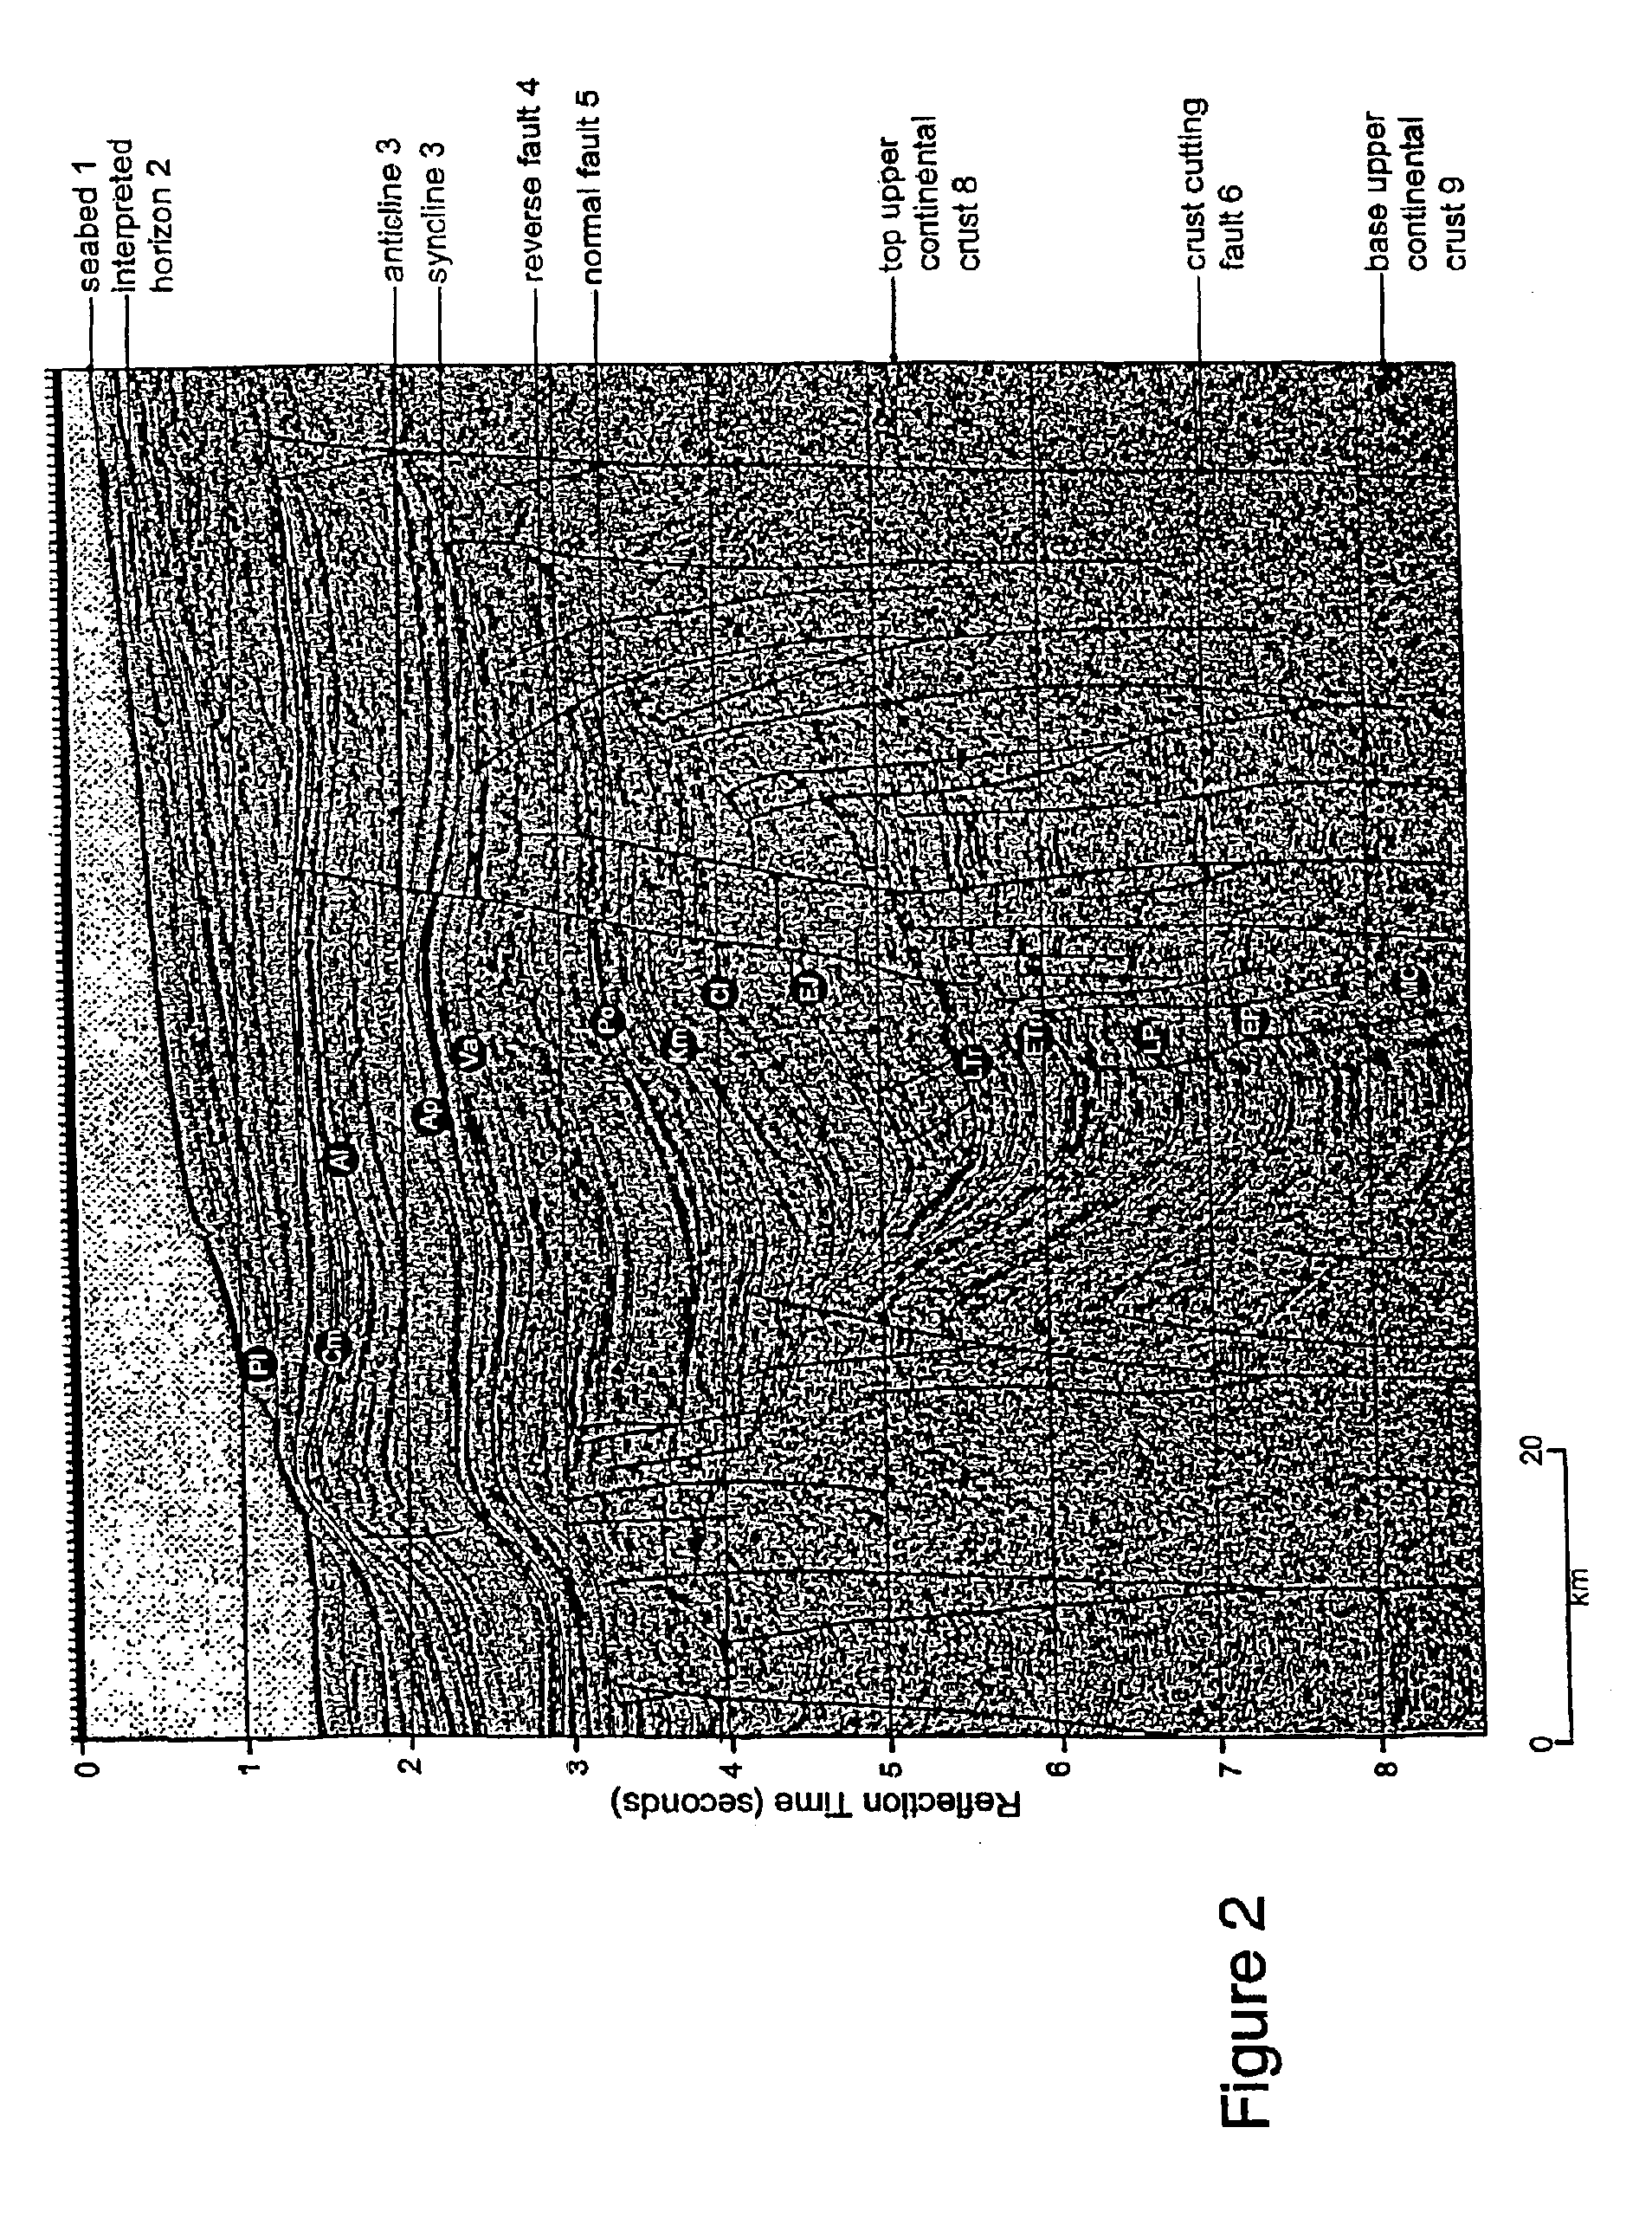 Method for detecting direction and relative magnitude of maximum horizontal stress in earth's crust